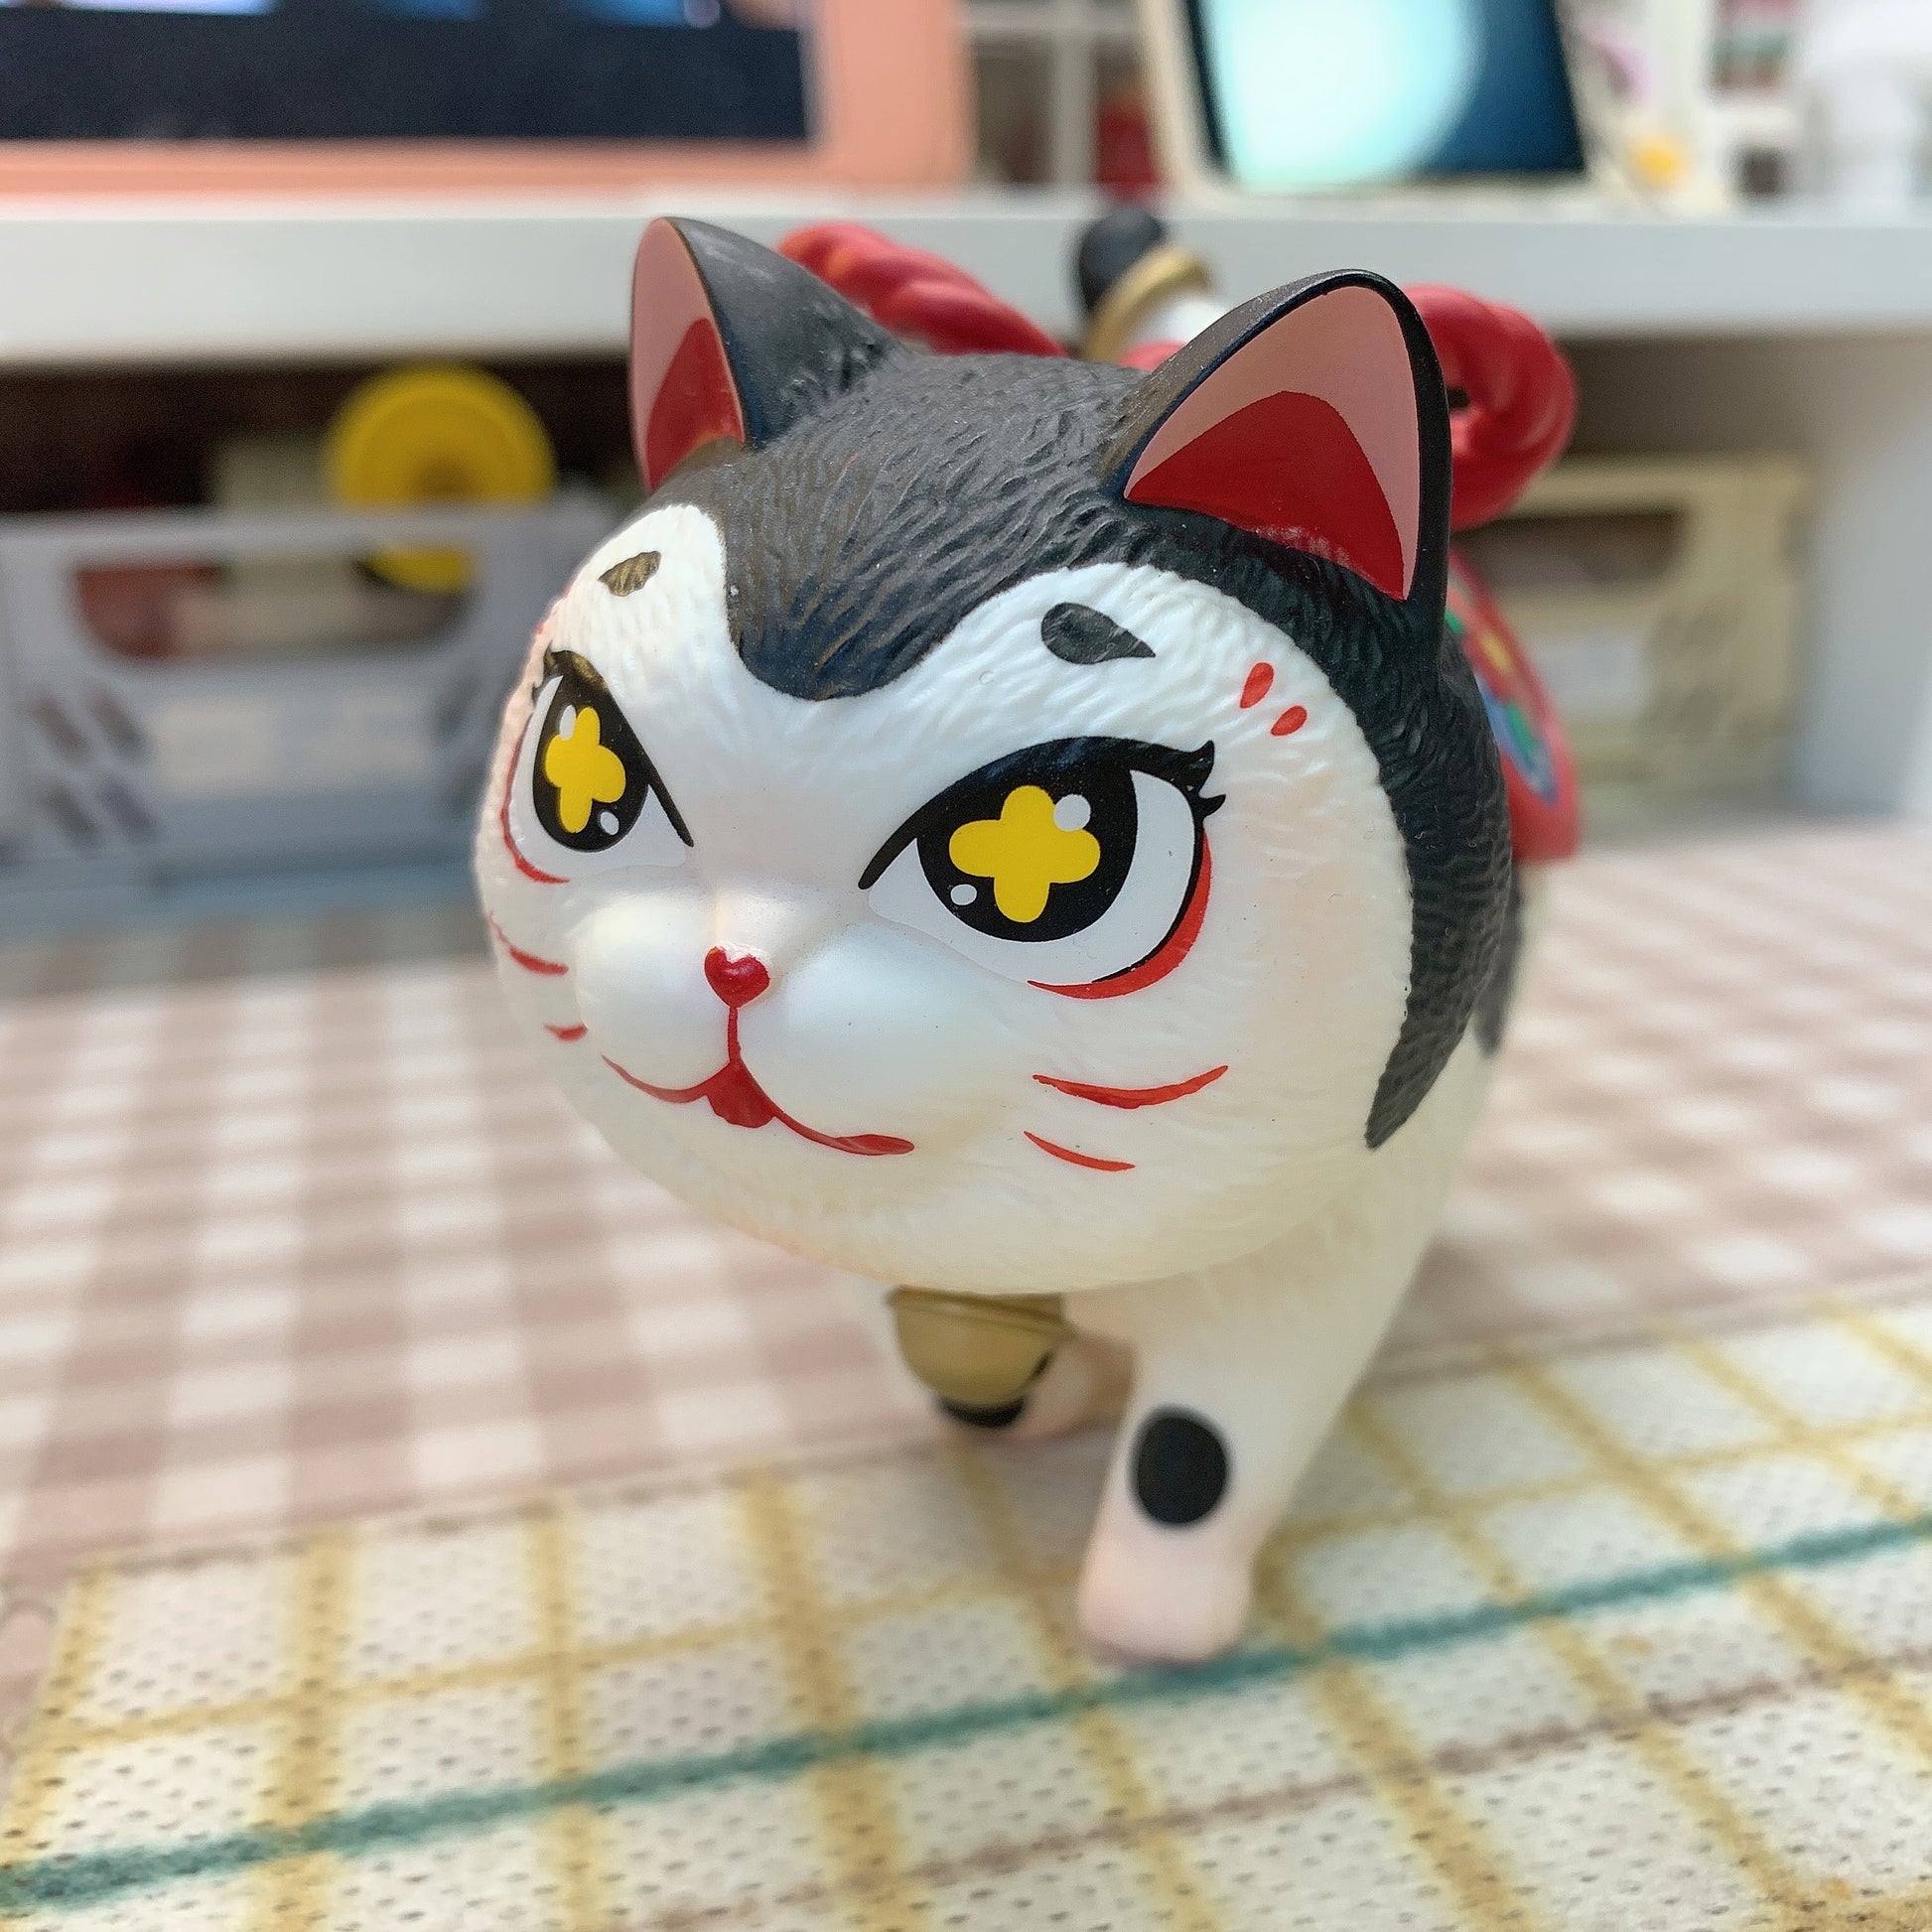 PRELOVED and SALE 】Miao-Ling-Dang Collections blind box toy